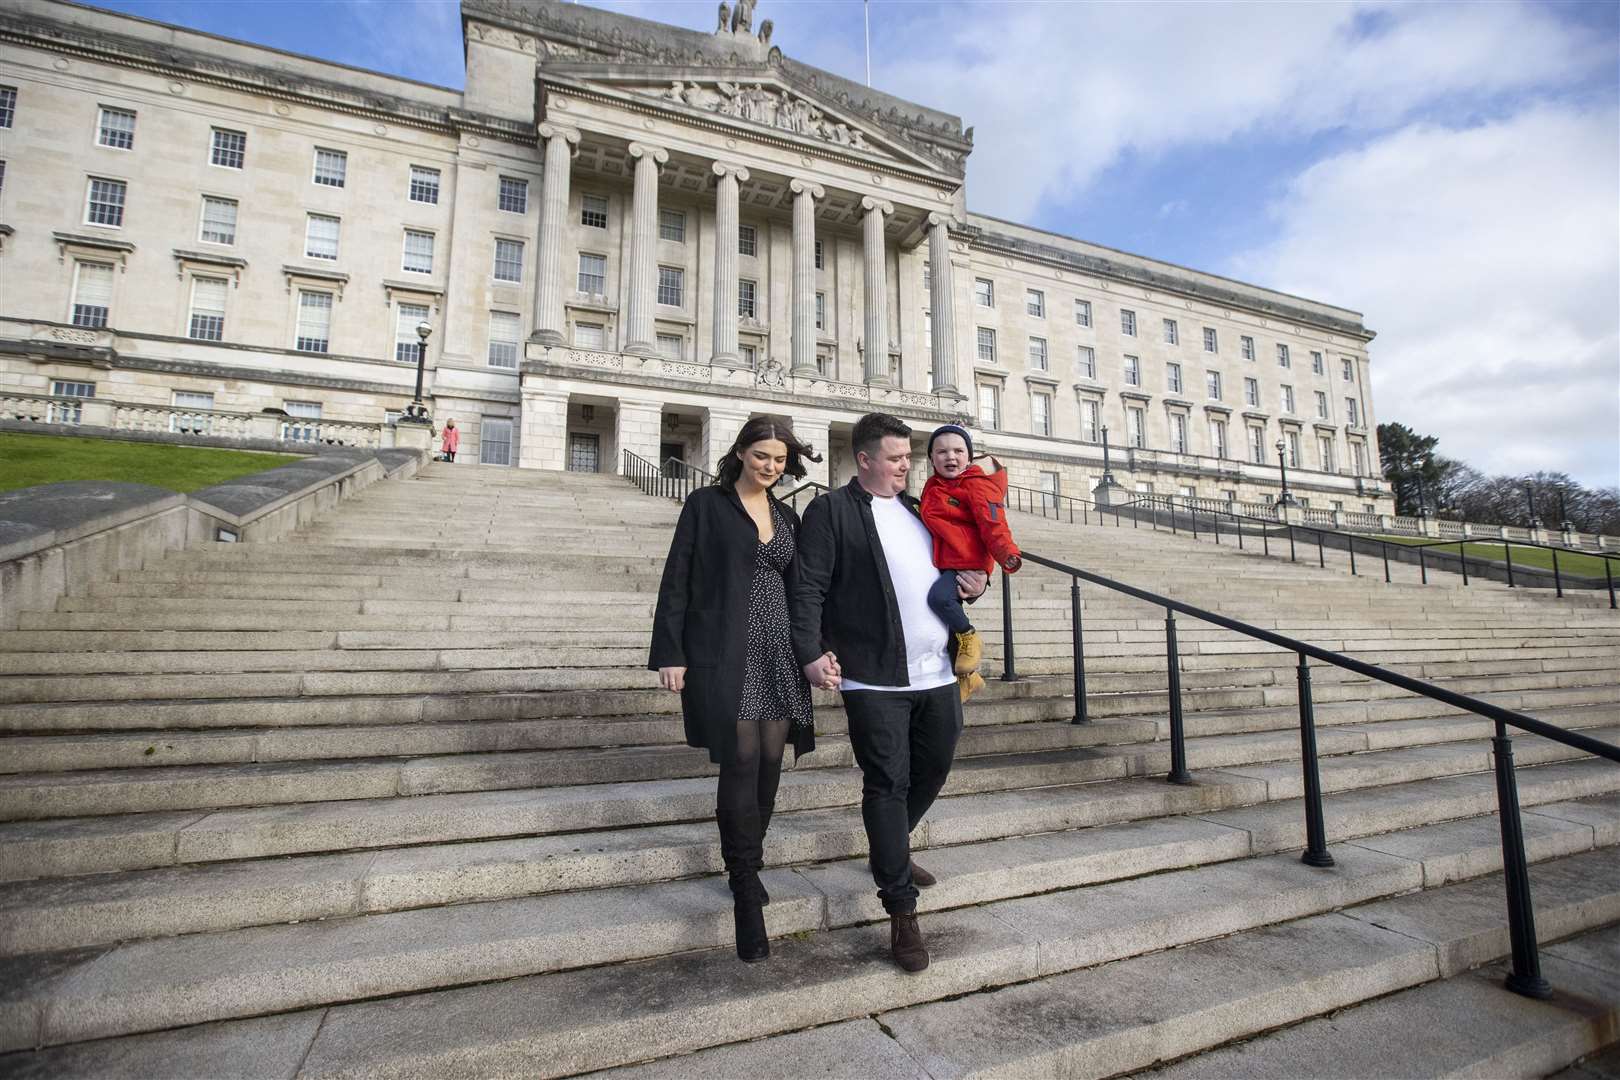 Daithi MacGabhann with his dad Mairtin MacGabhann and mother Seph Ni Mheallain on the steps of Parliament Buildings at Stormont in Belfast (Liam McBurney/PA)